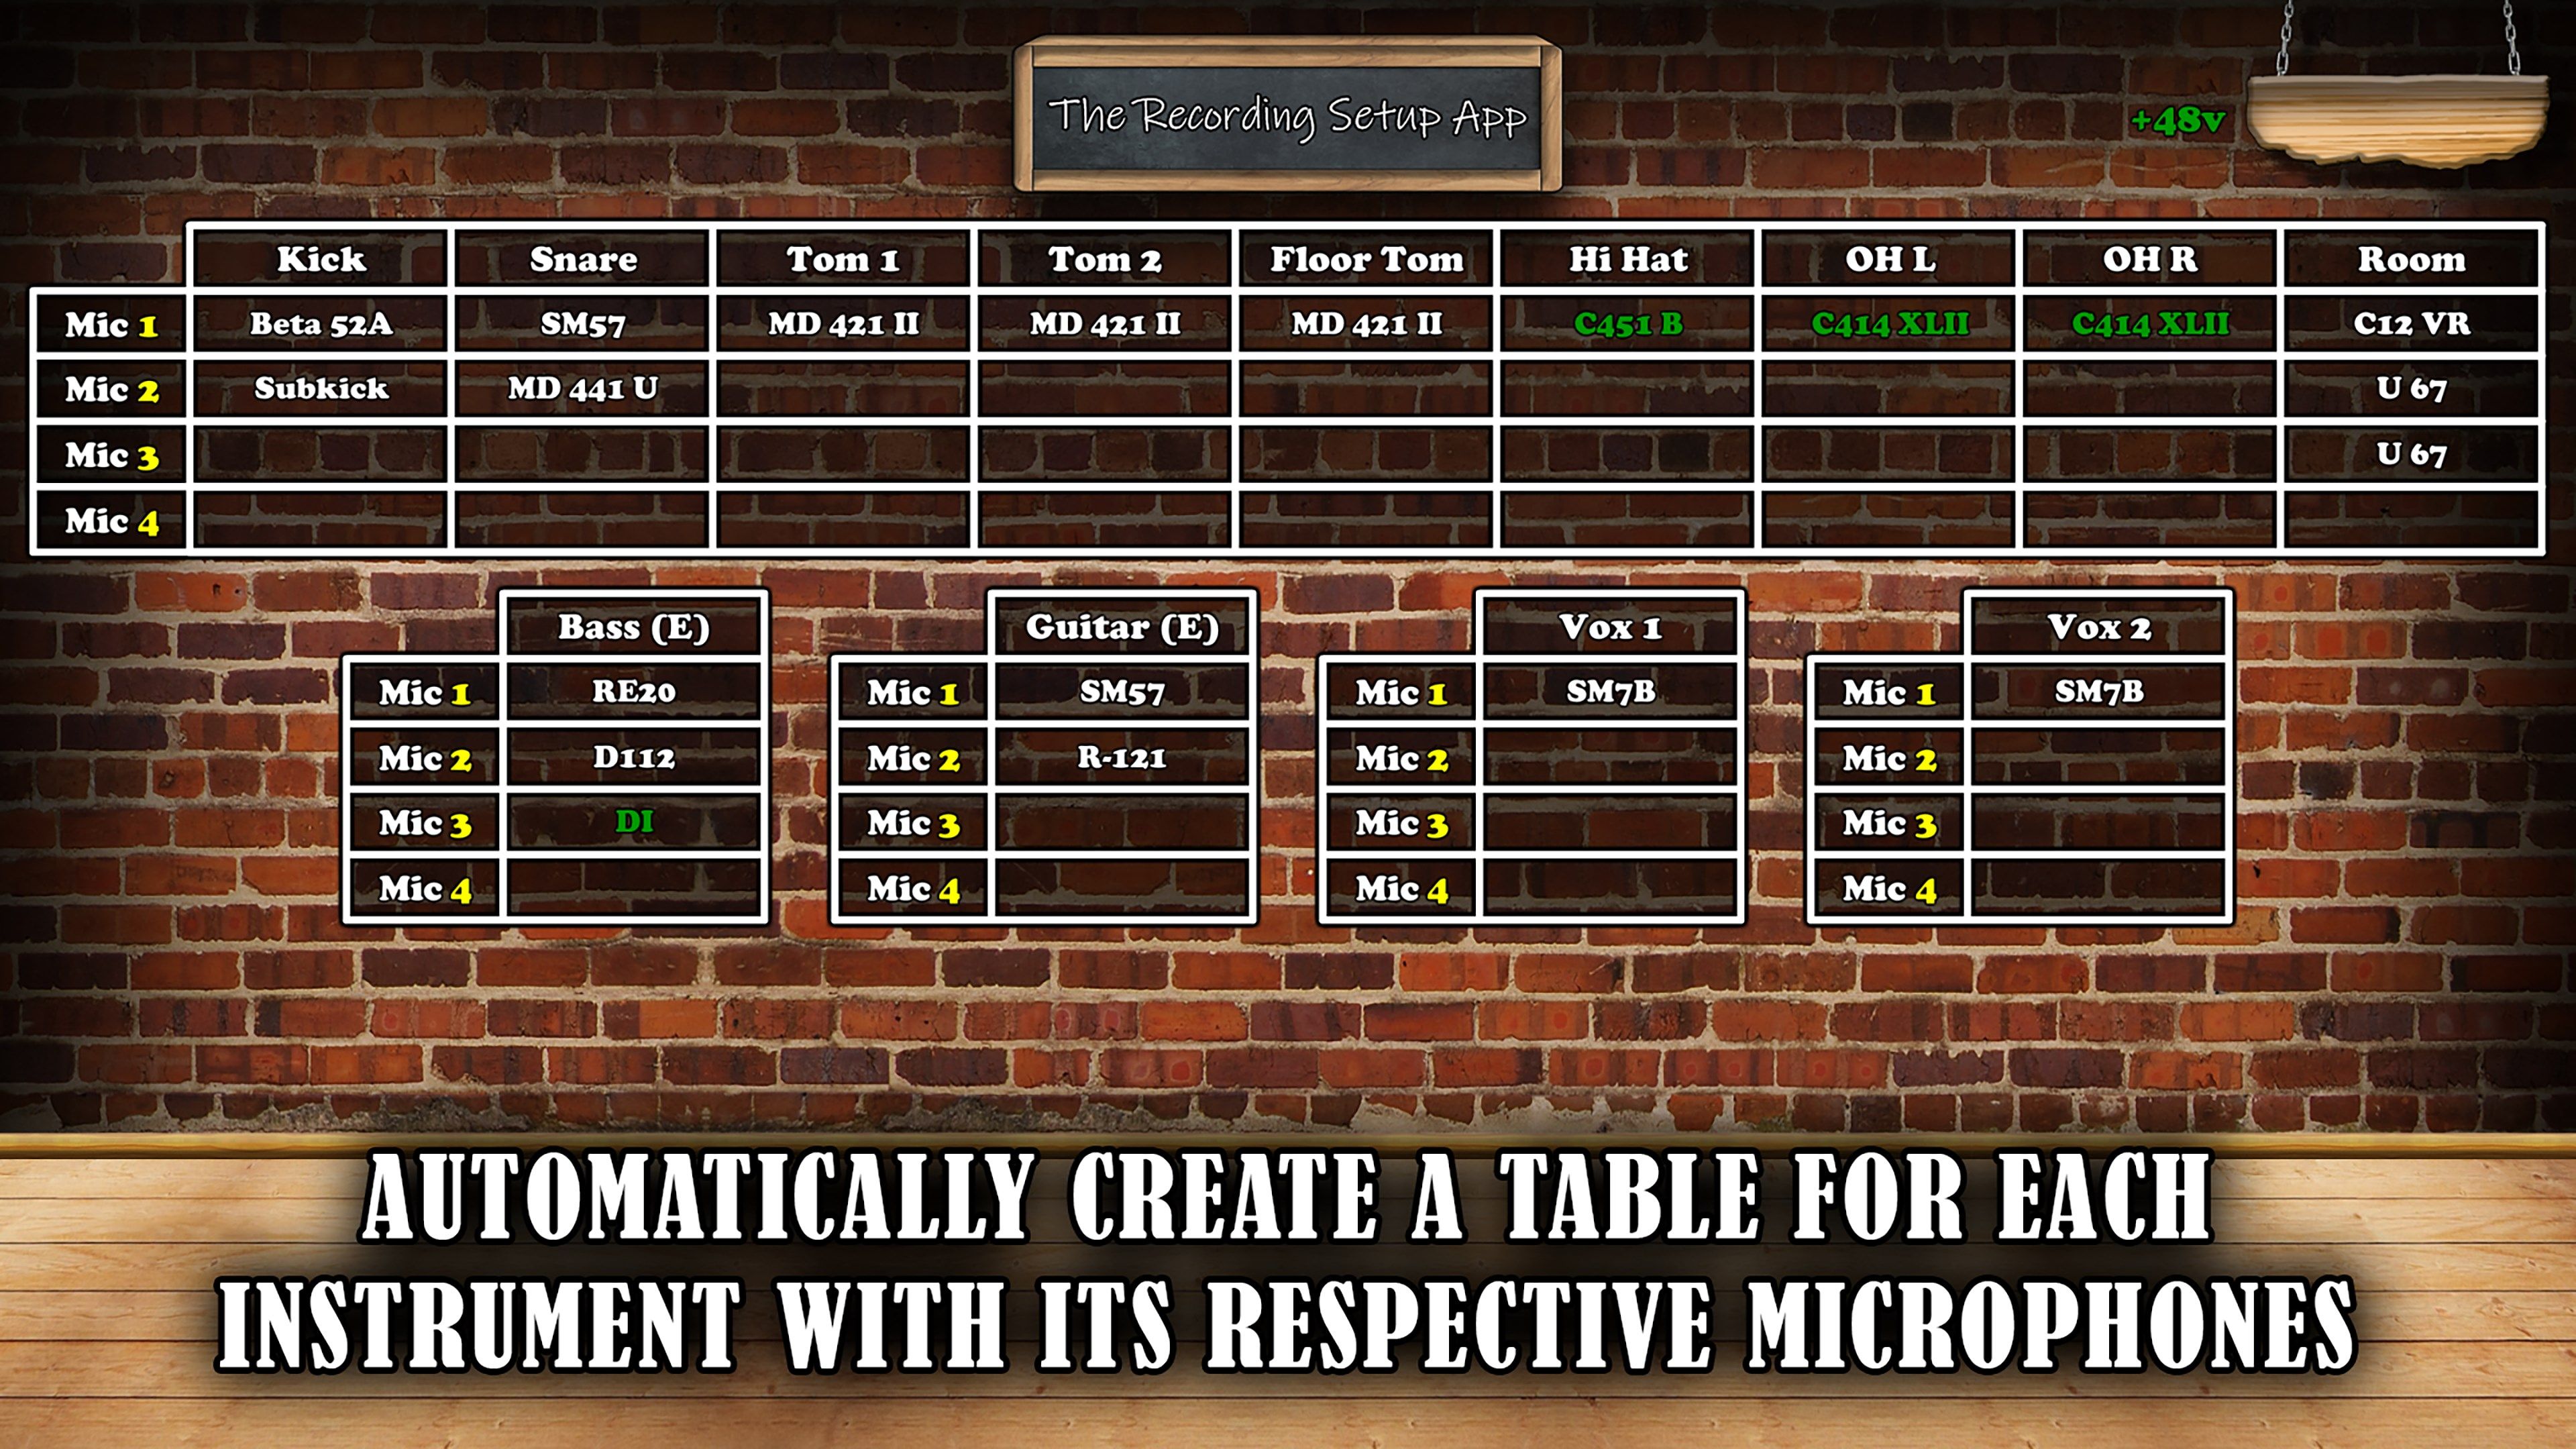 Automatically create a table for each instrument with its respective microphones